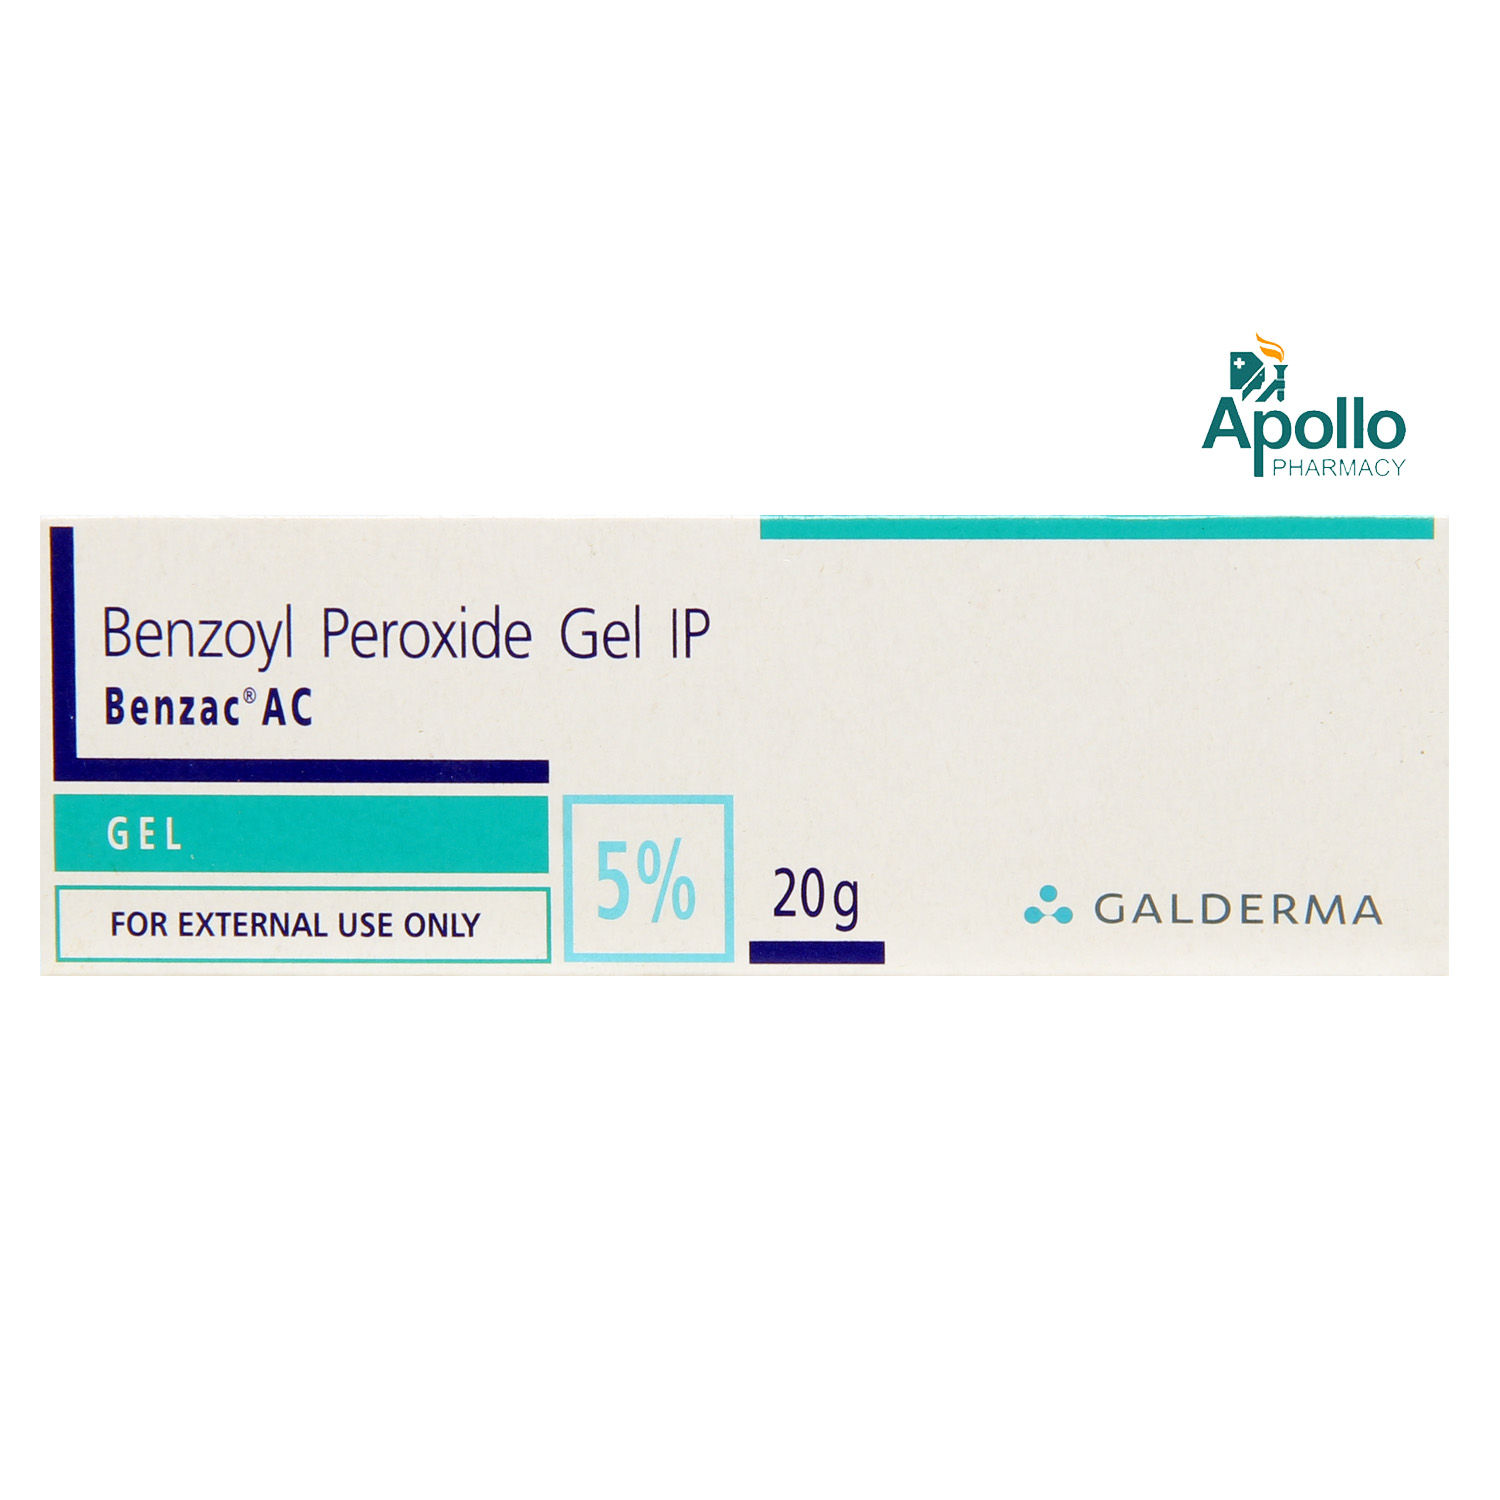 Benzac AC 5% Gel gm Price, Uses, Side Effects, Composition - Apollo Pharmacy